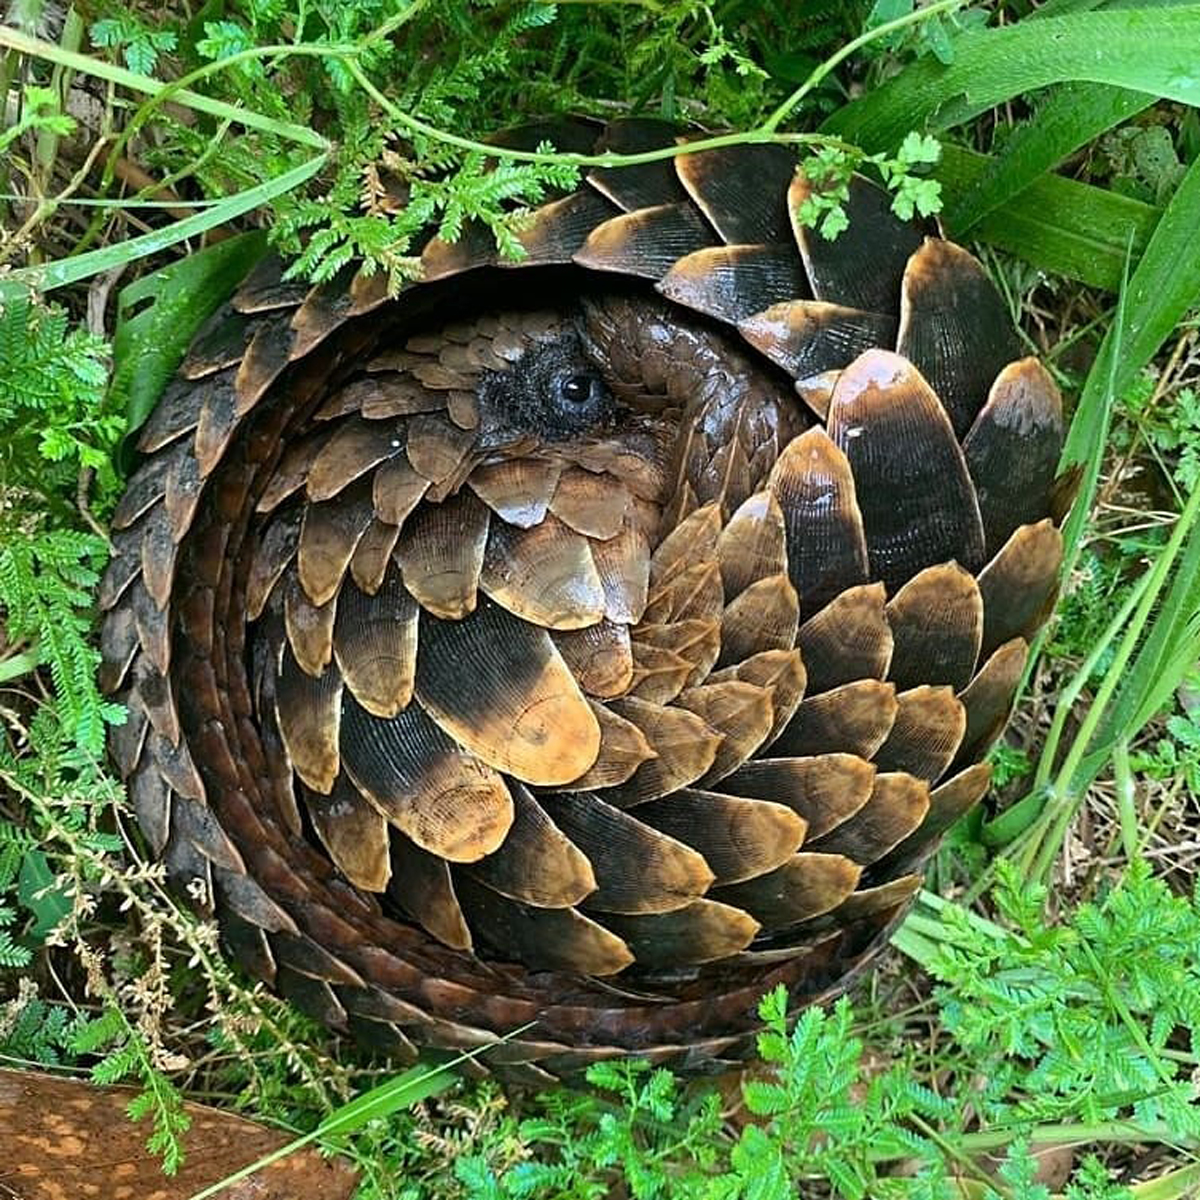 Curled up black-bellied pangolin © Angelia Young